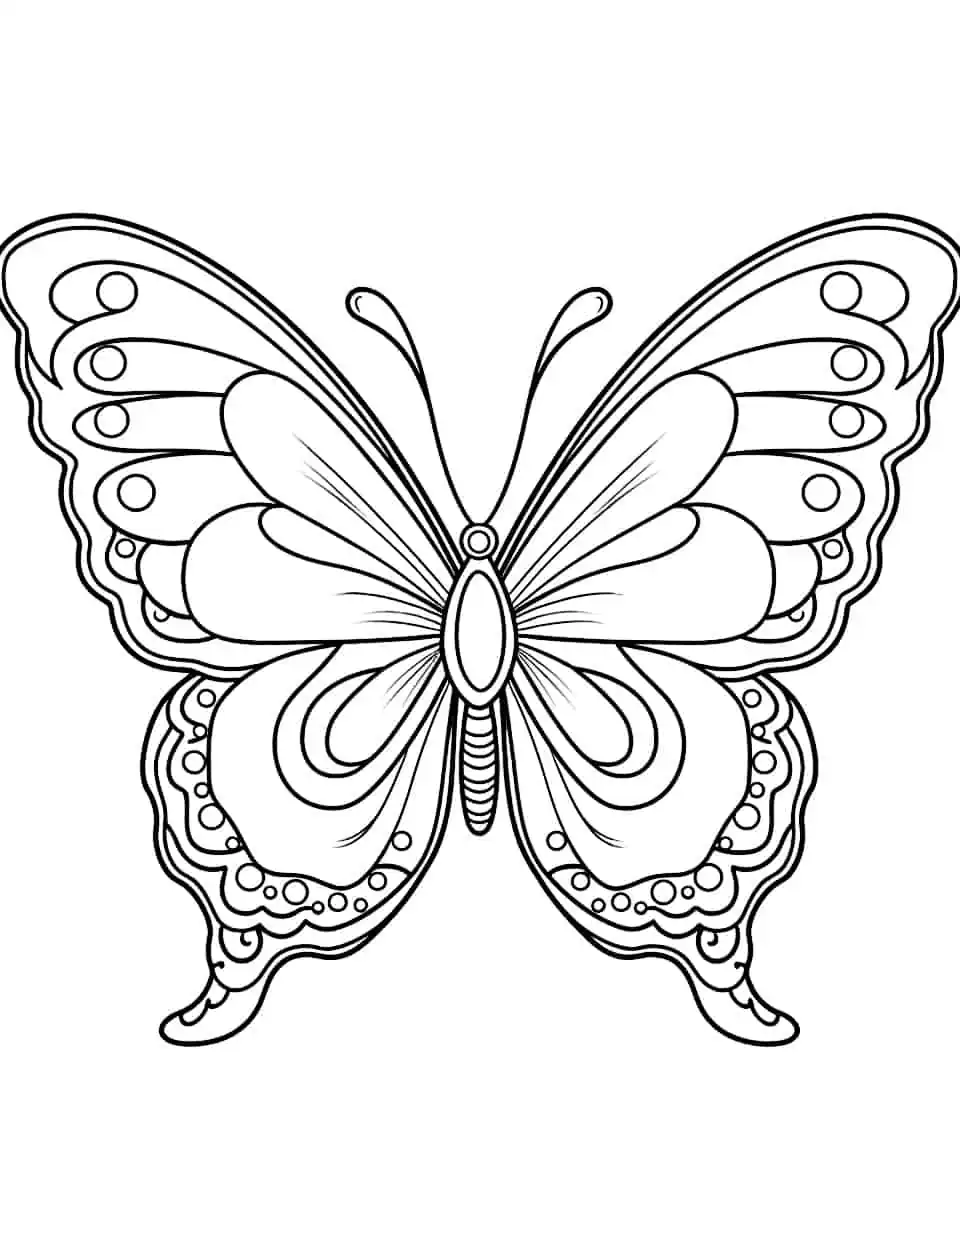 Fancy Flutter Butterfly Coloring Page - A detailed coloring page showcasing an intricately patterned butterfly with elaborate wings.